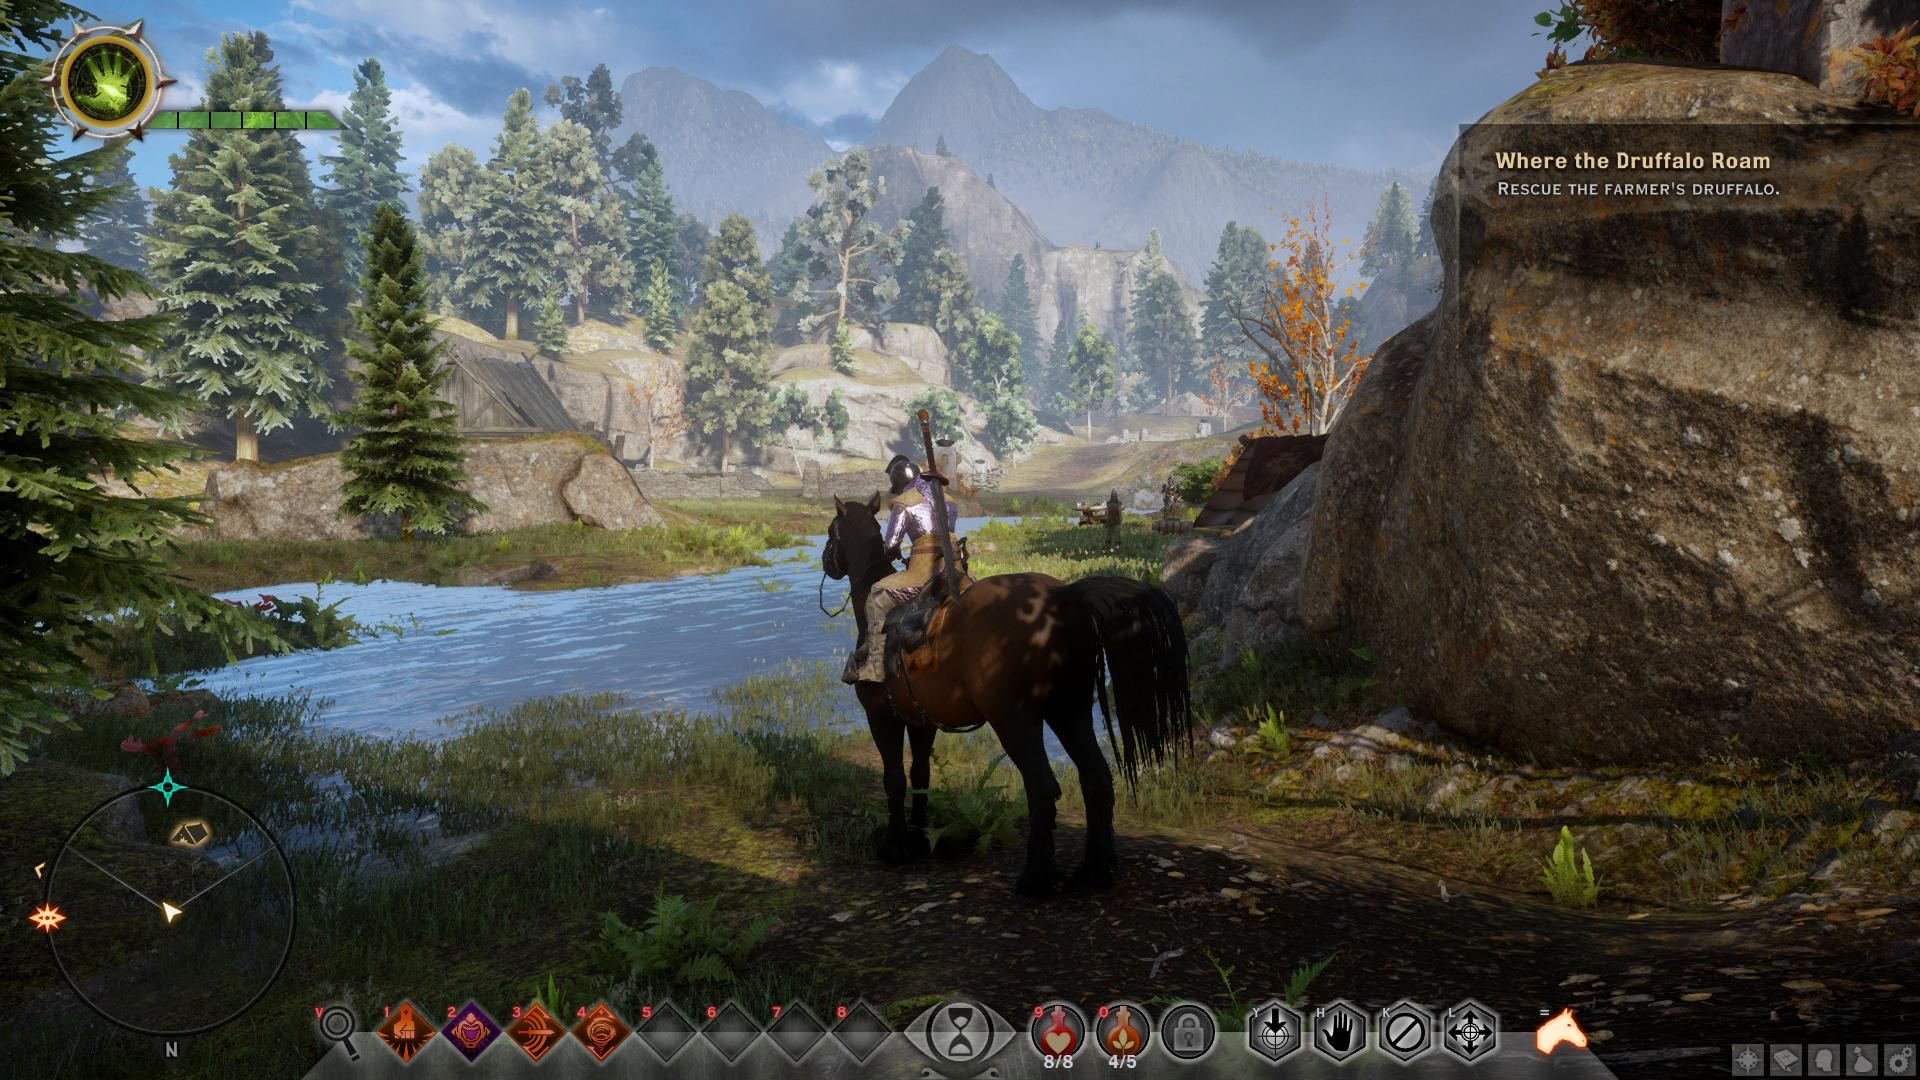 Play Dragon Age In Your Browser - The Escapist